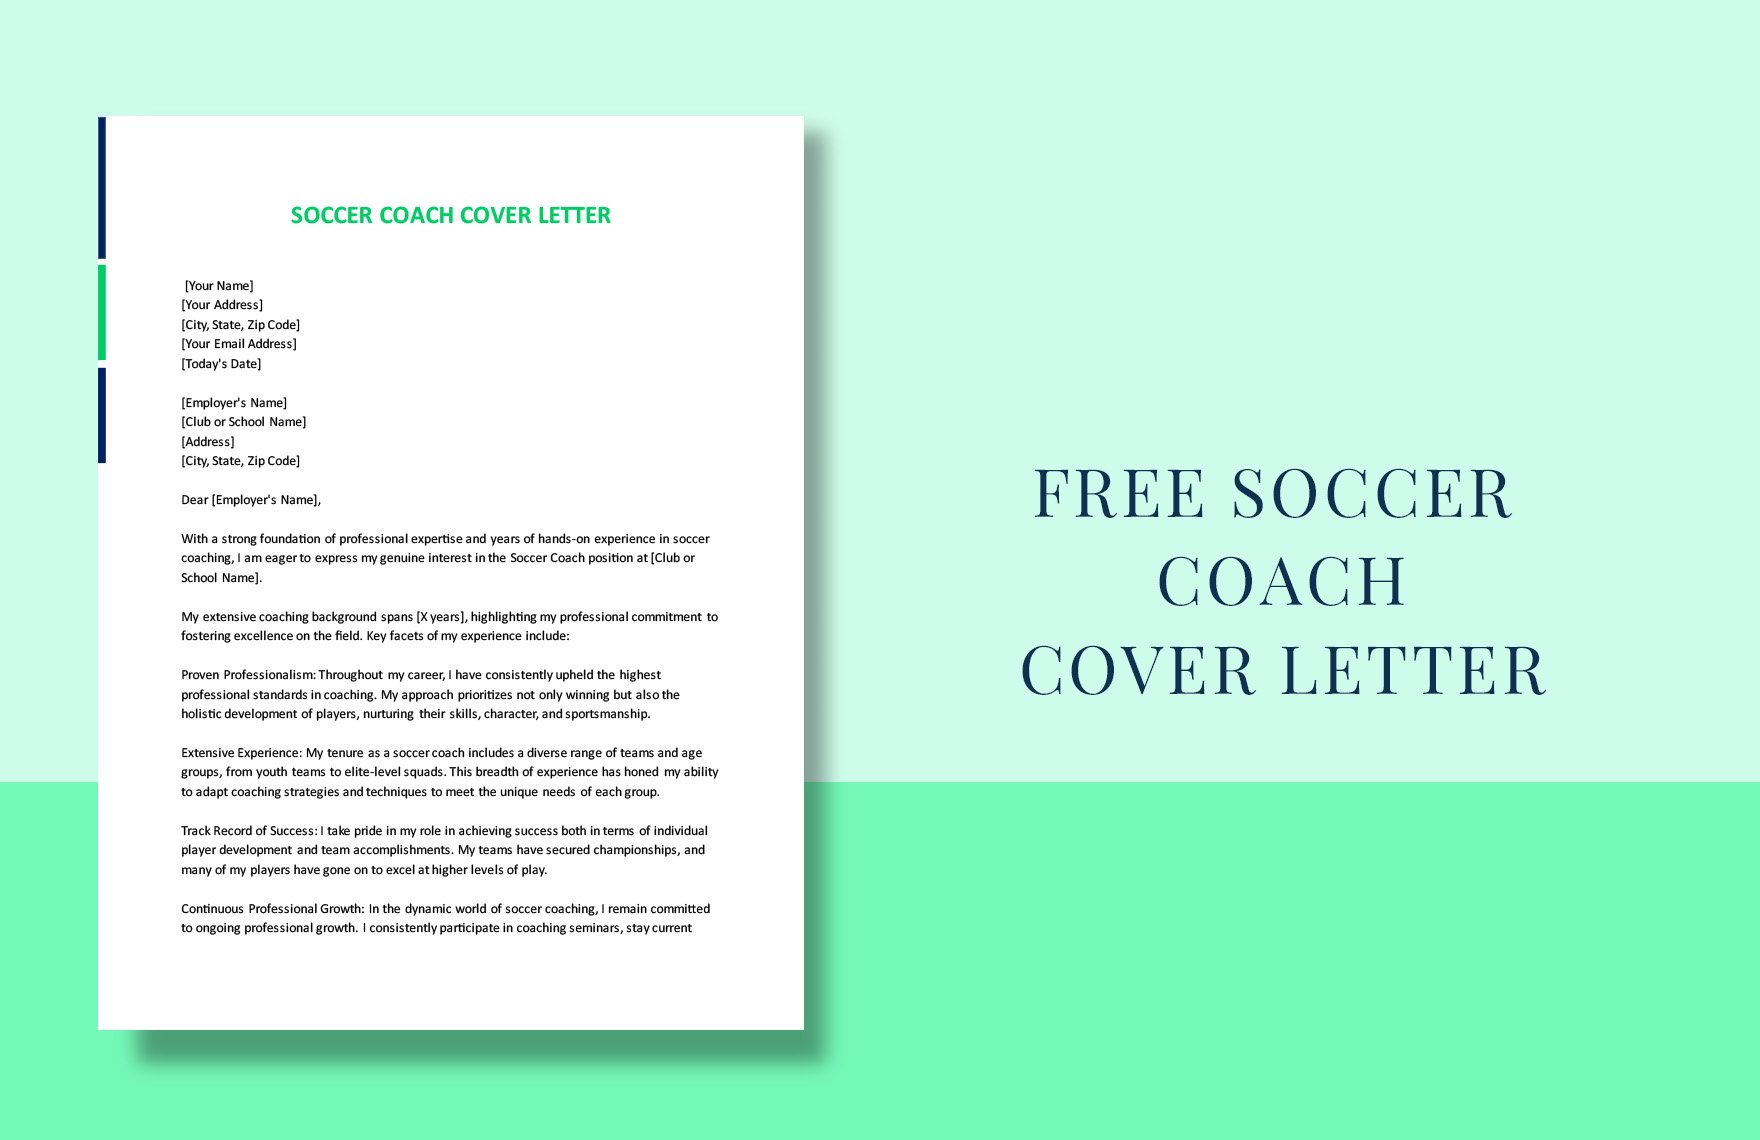 Soccer Coach Cover Letter in Word, Google Docs, PDF